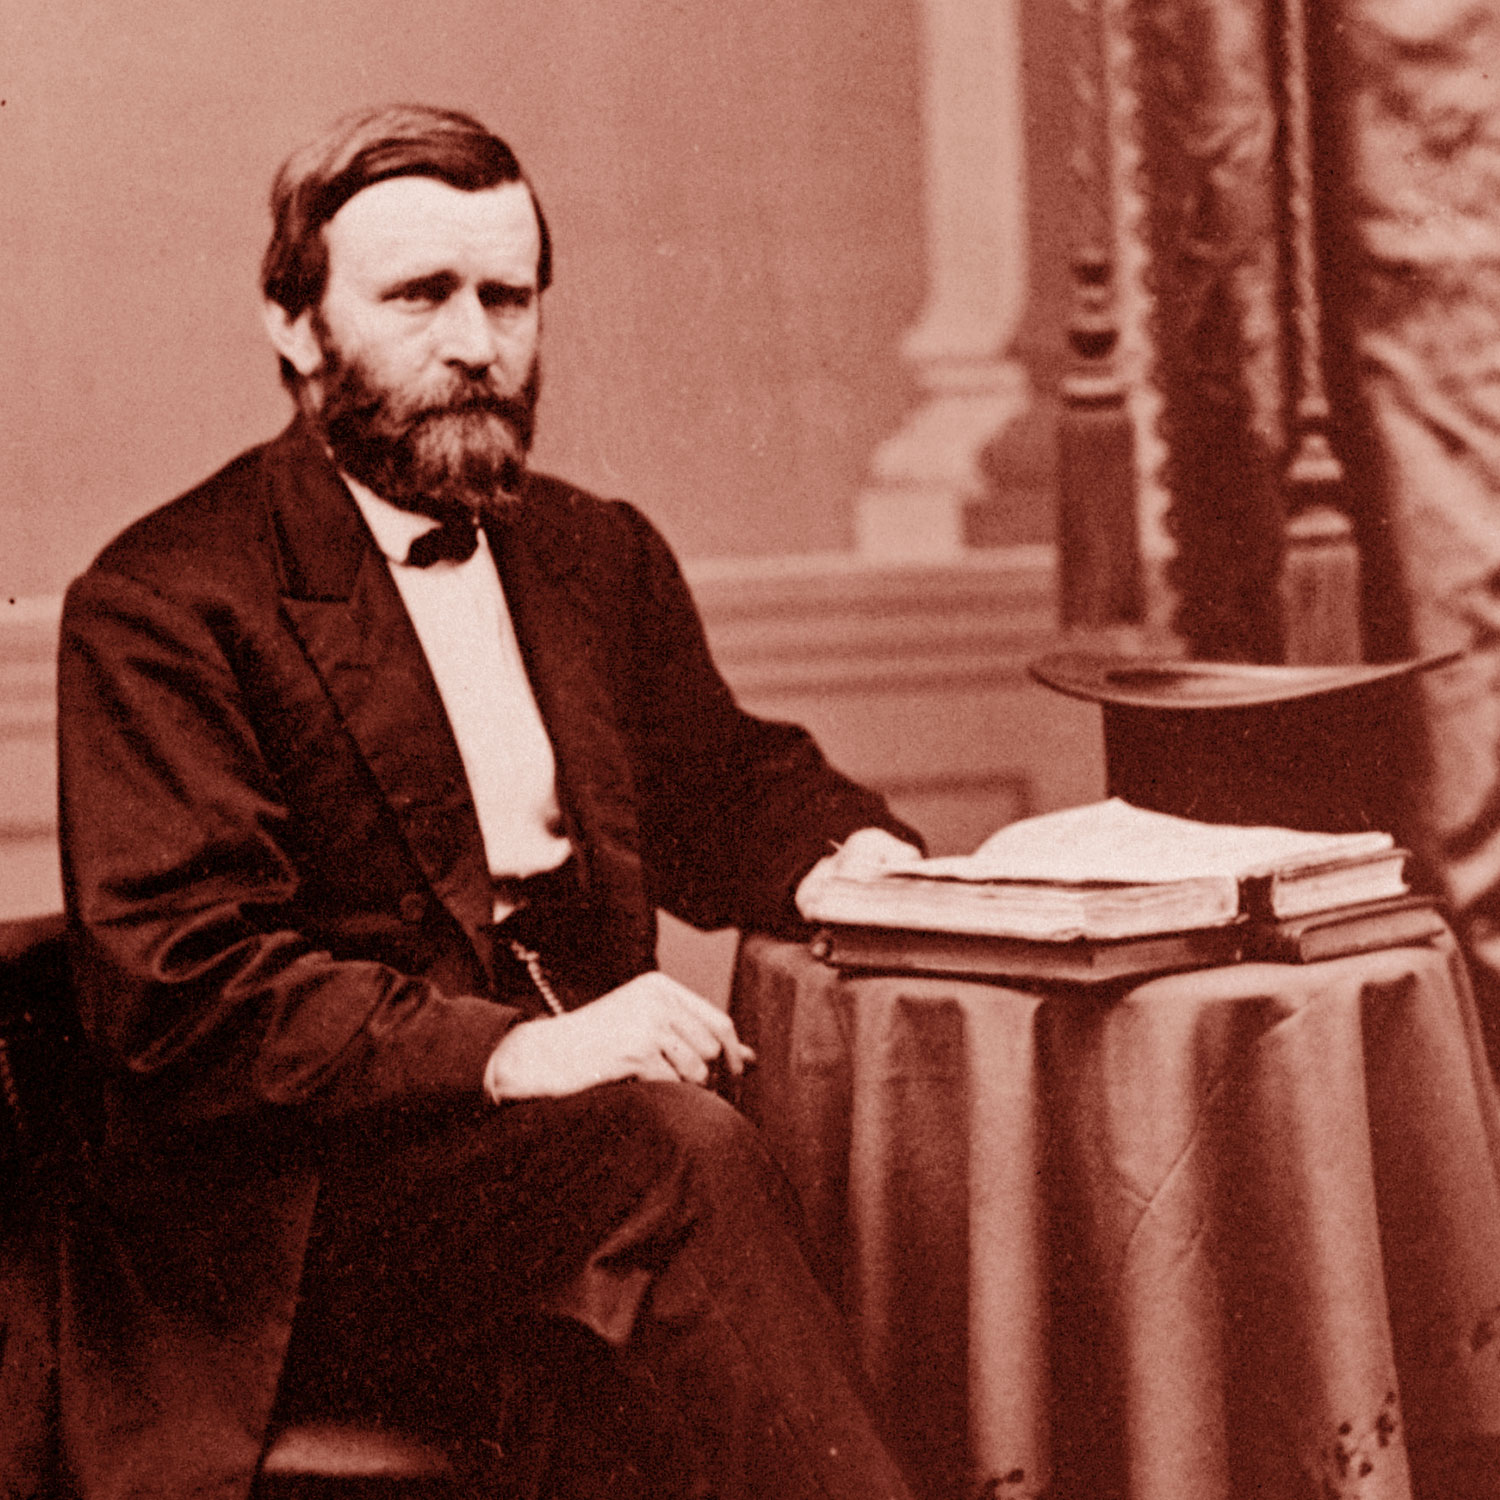 President Grant fired his own special prosecutor